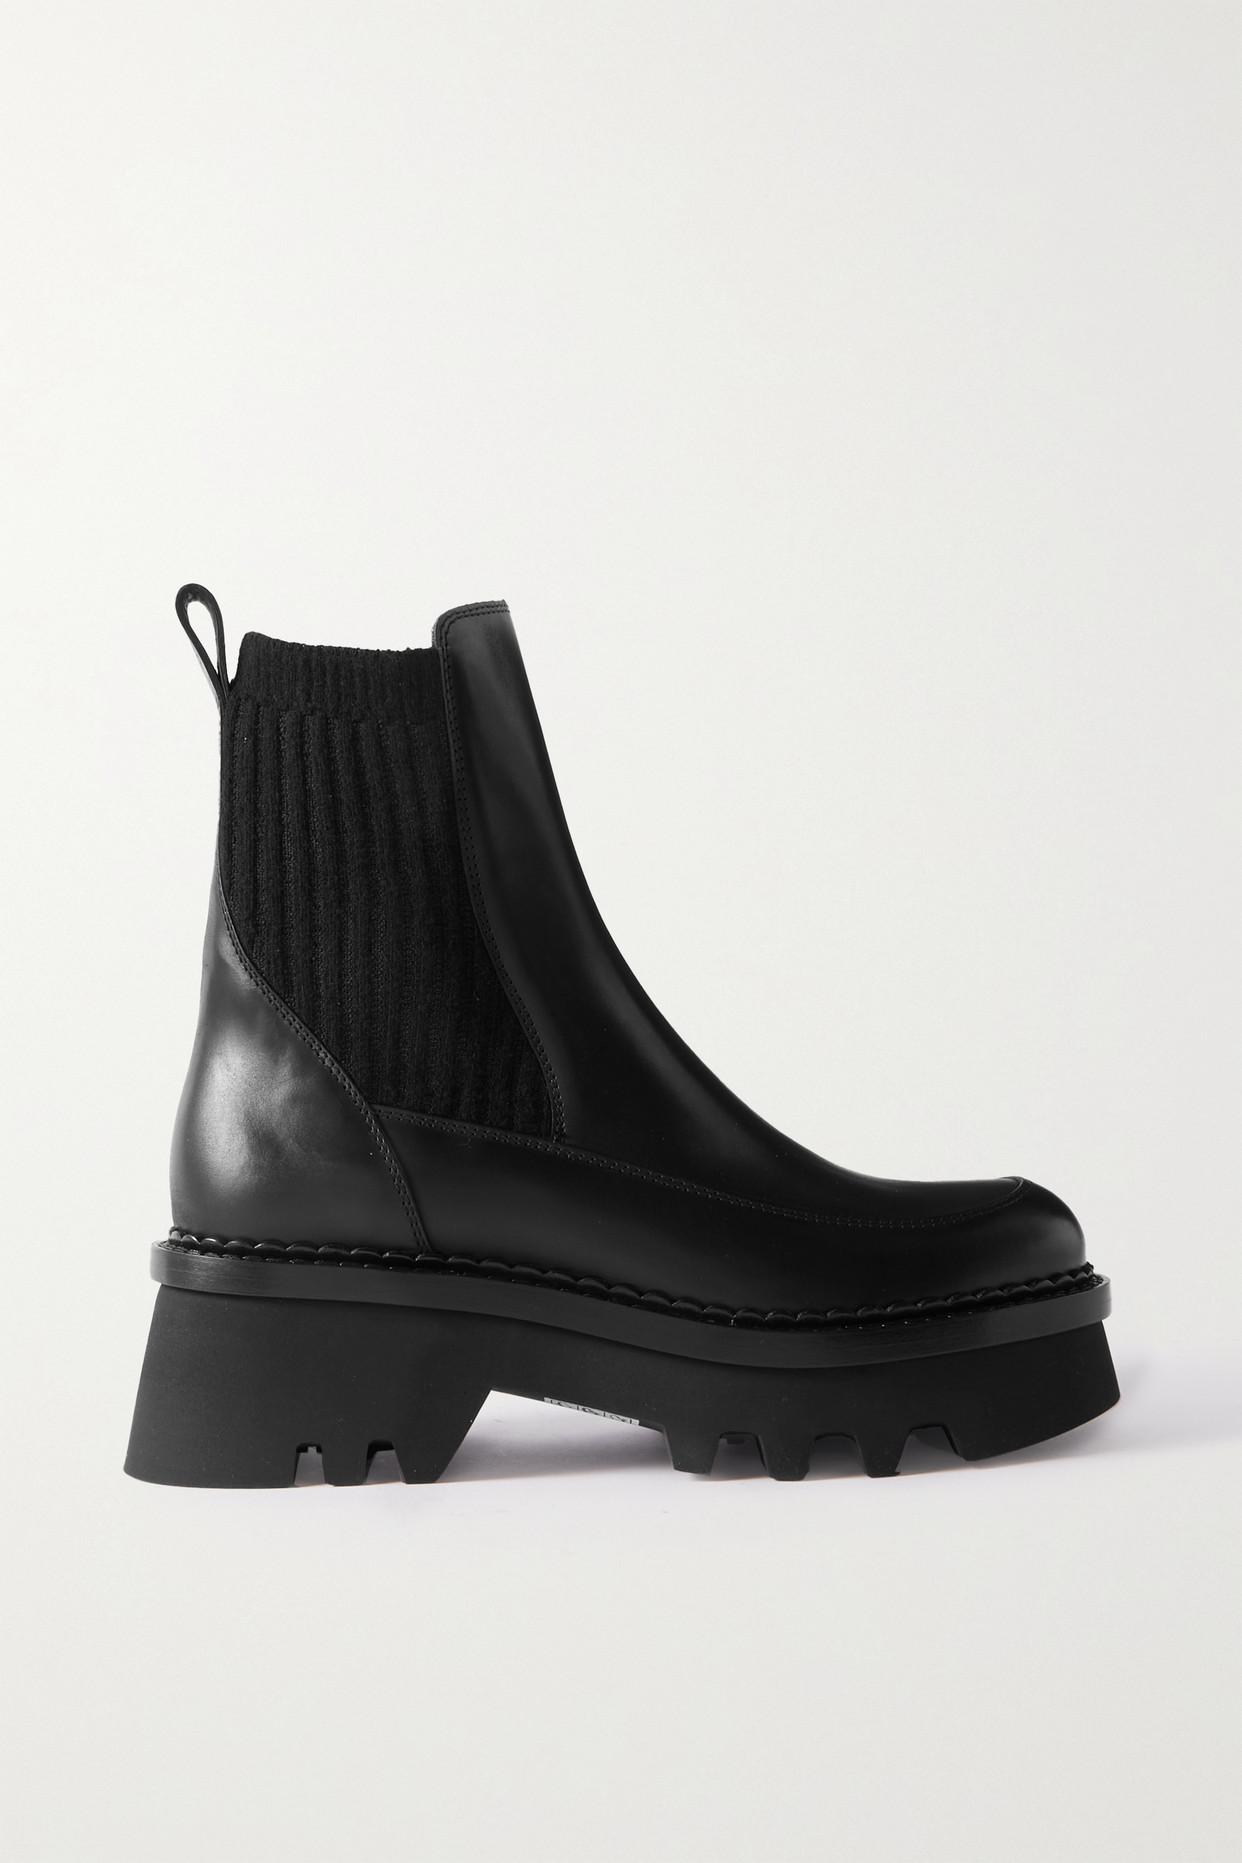 Chloé Owena Ribbed-knit And Leather Platform Chelsea Boots in Black | Lyst